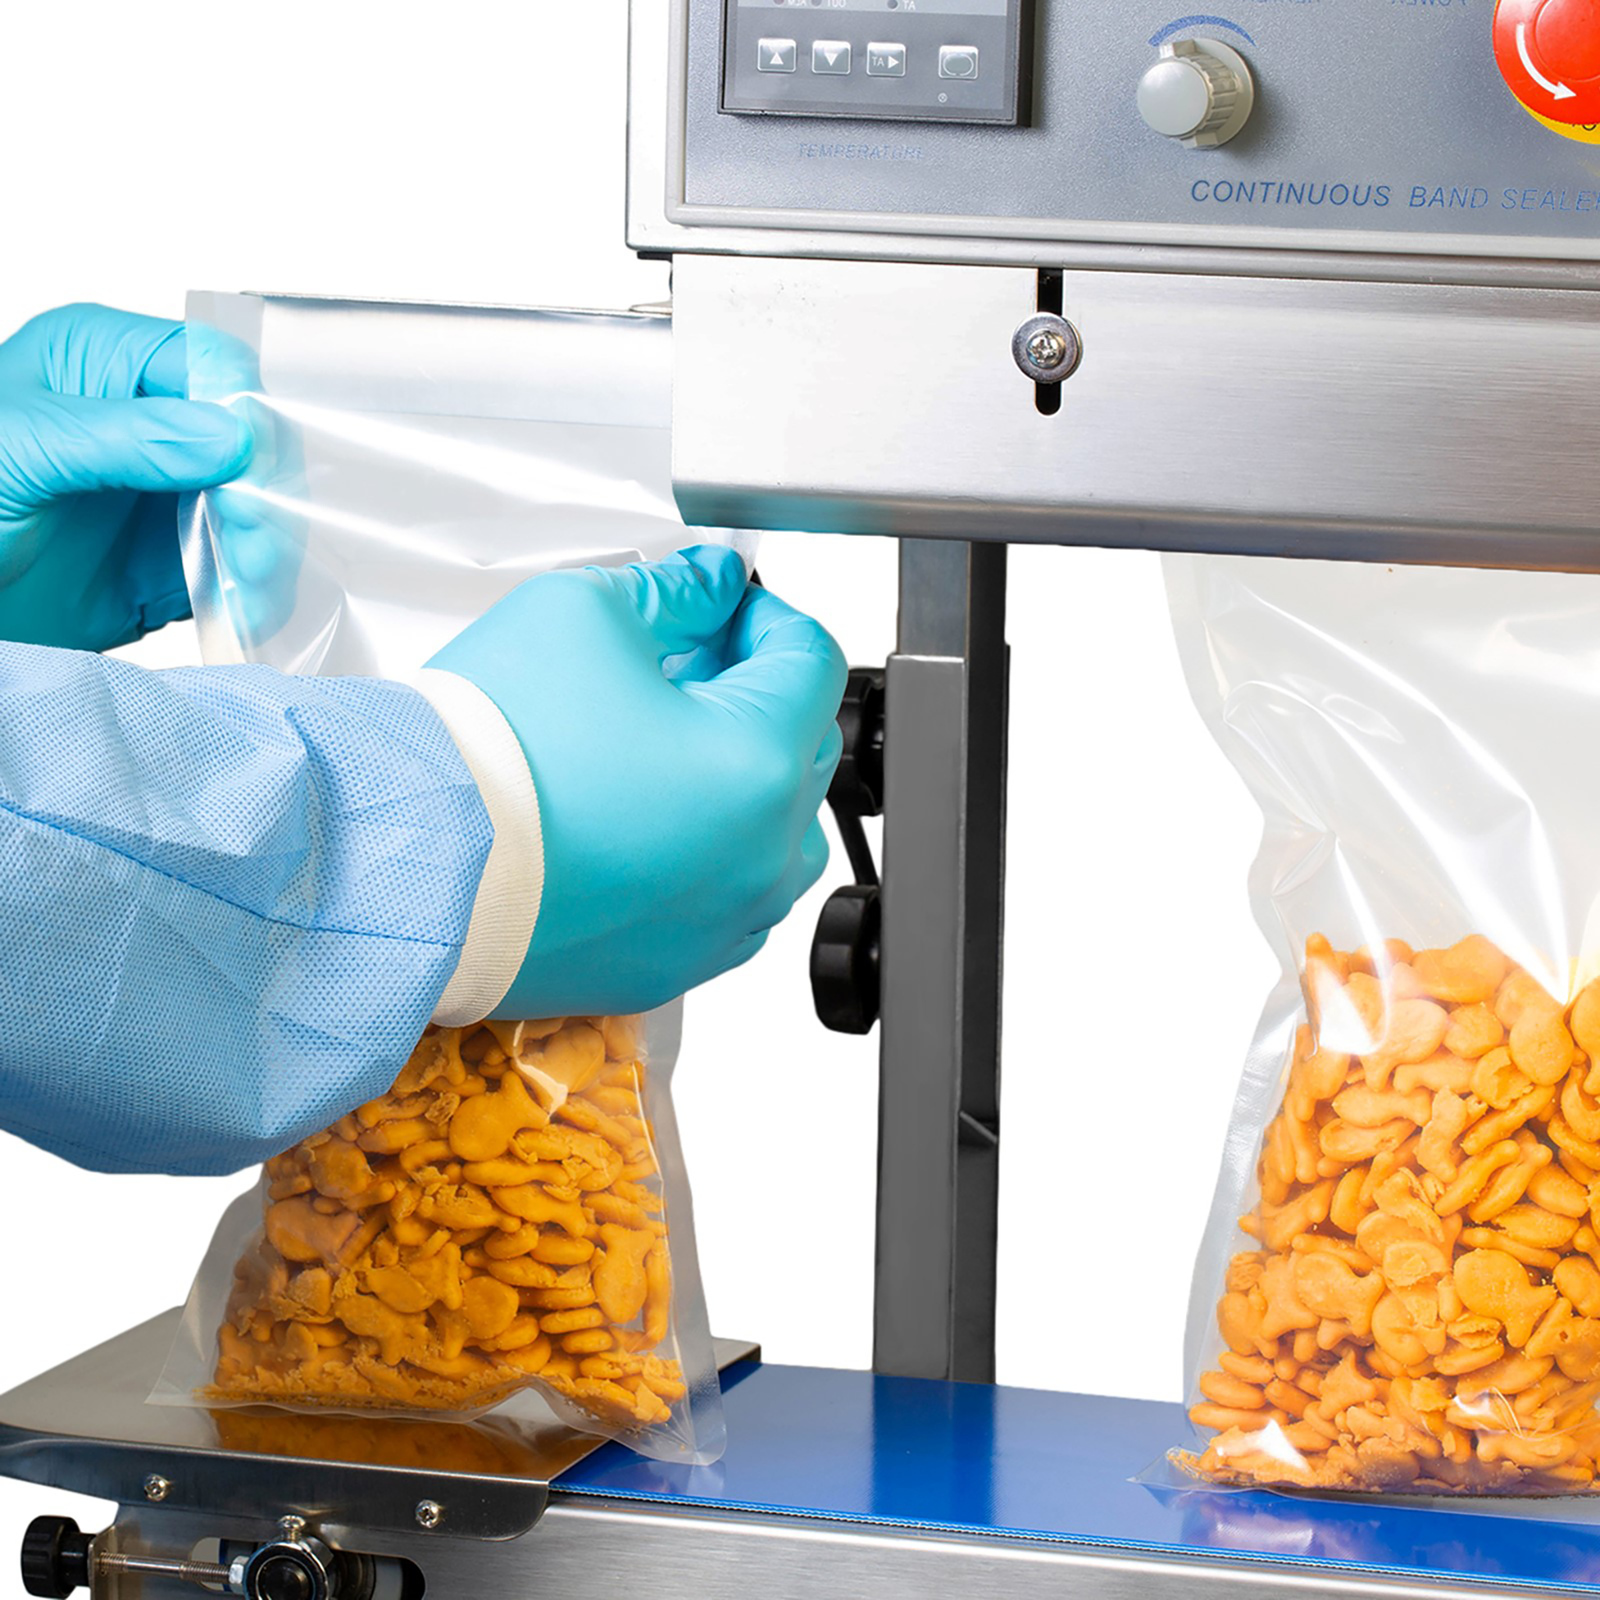 Operator is inserting several plastic bags filled with crackers through the left side of the JORESTECH continuous band sealing machine to get bags sealed. 